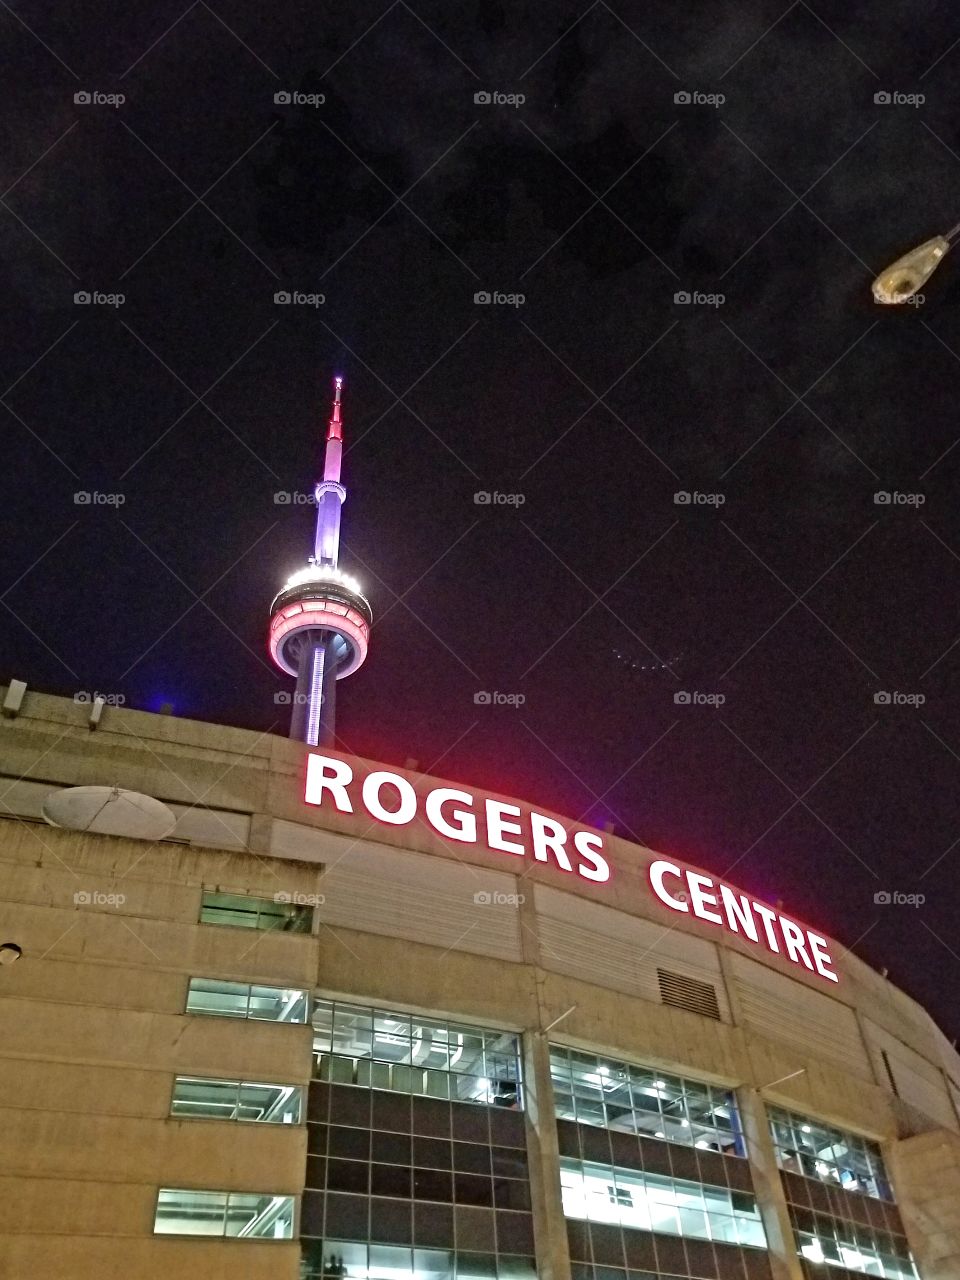 Not sure what those lights are in the sky next to the CN tower took the picture outside no windows or reflections?